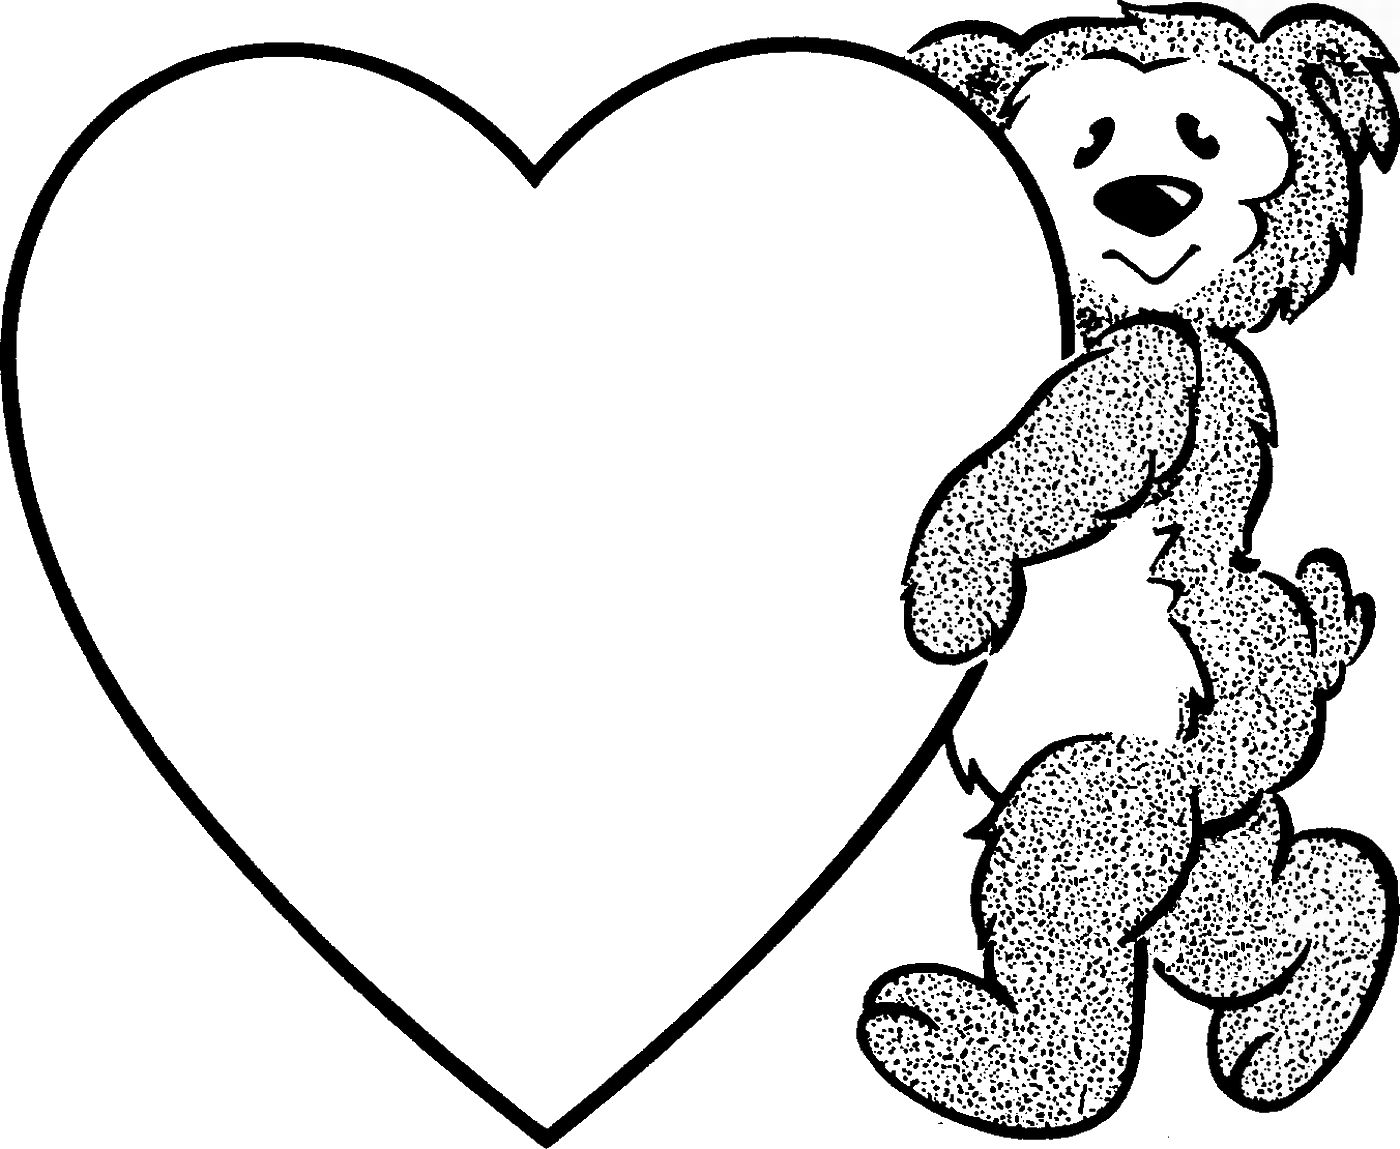 Heart Coloring Pages hearts_cl_09 Printable 2021 3175 Coloring4free